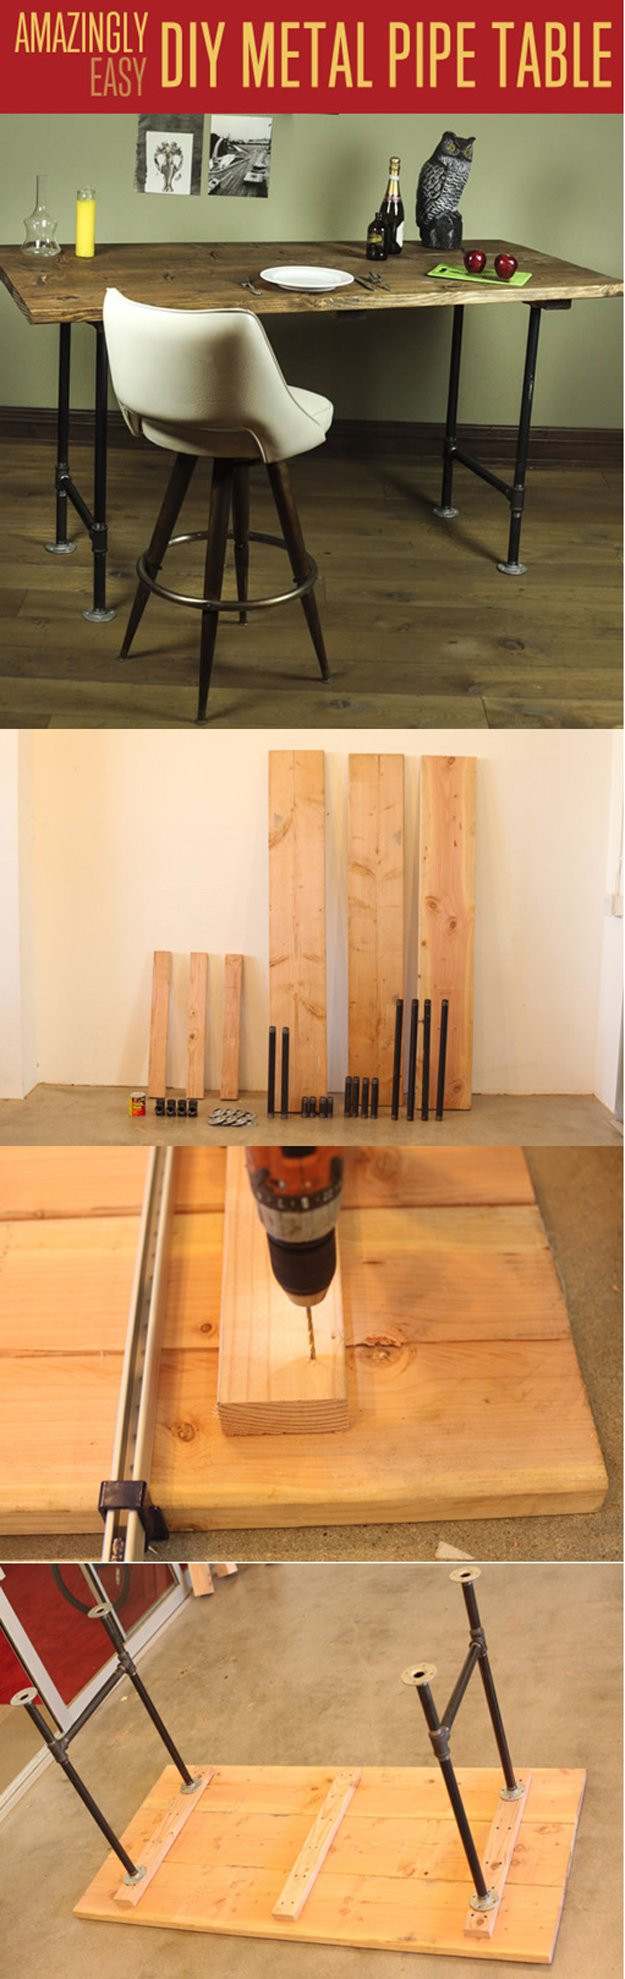 DIY Wood Projects
 Easy Woodworking Projects Craft Ideas